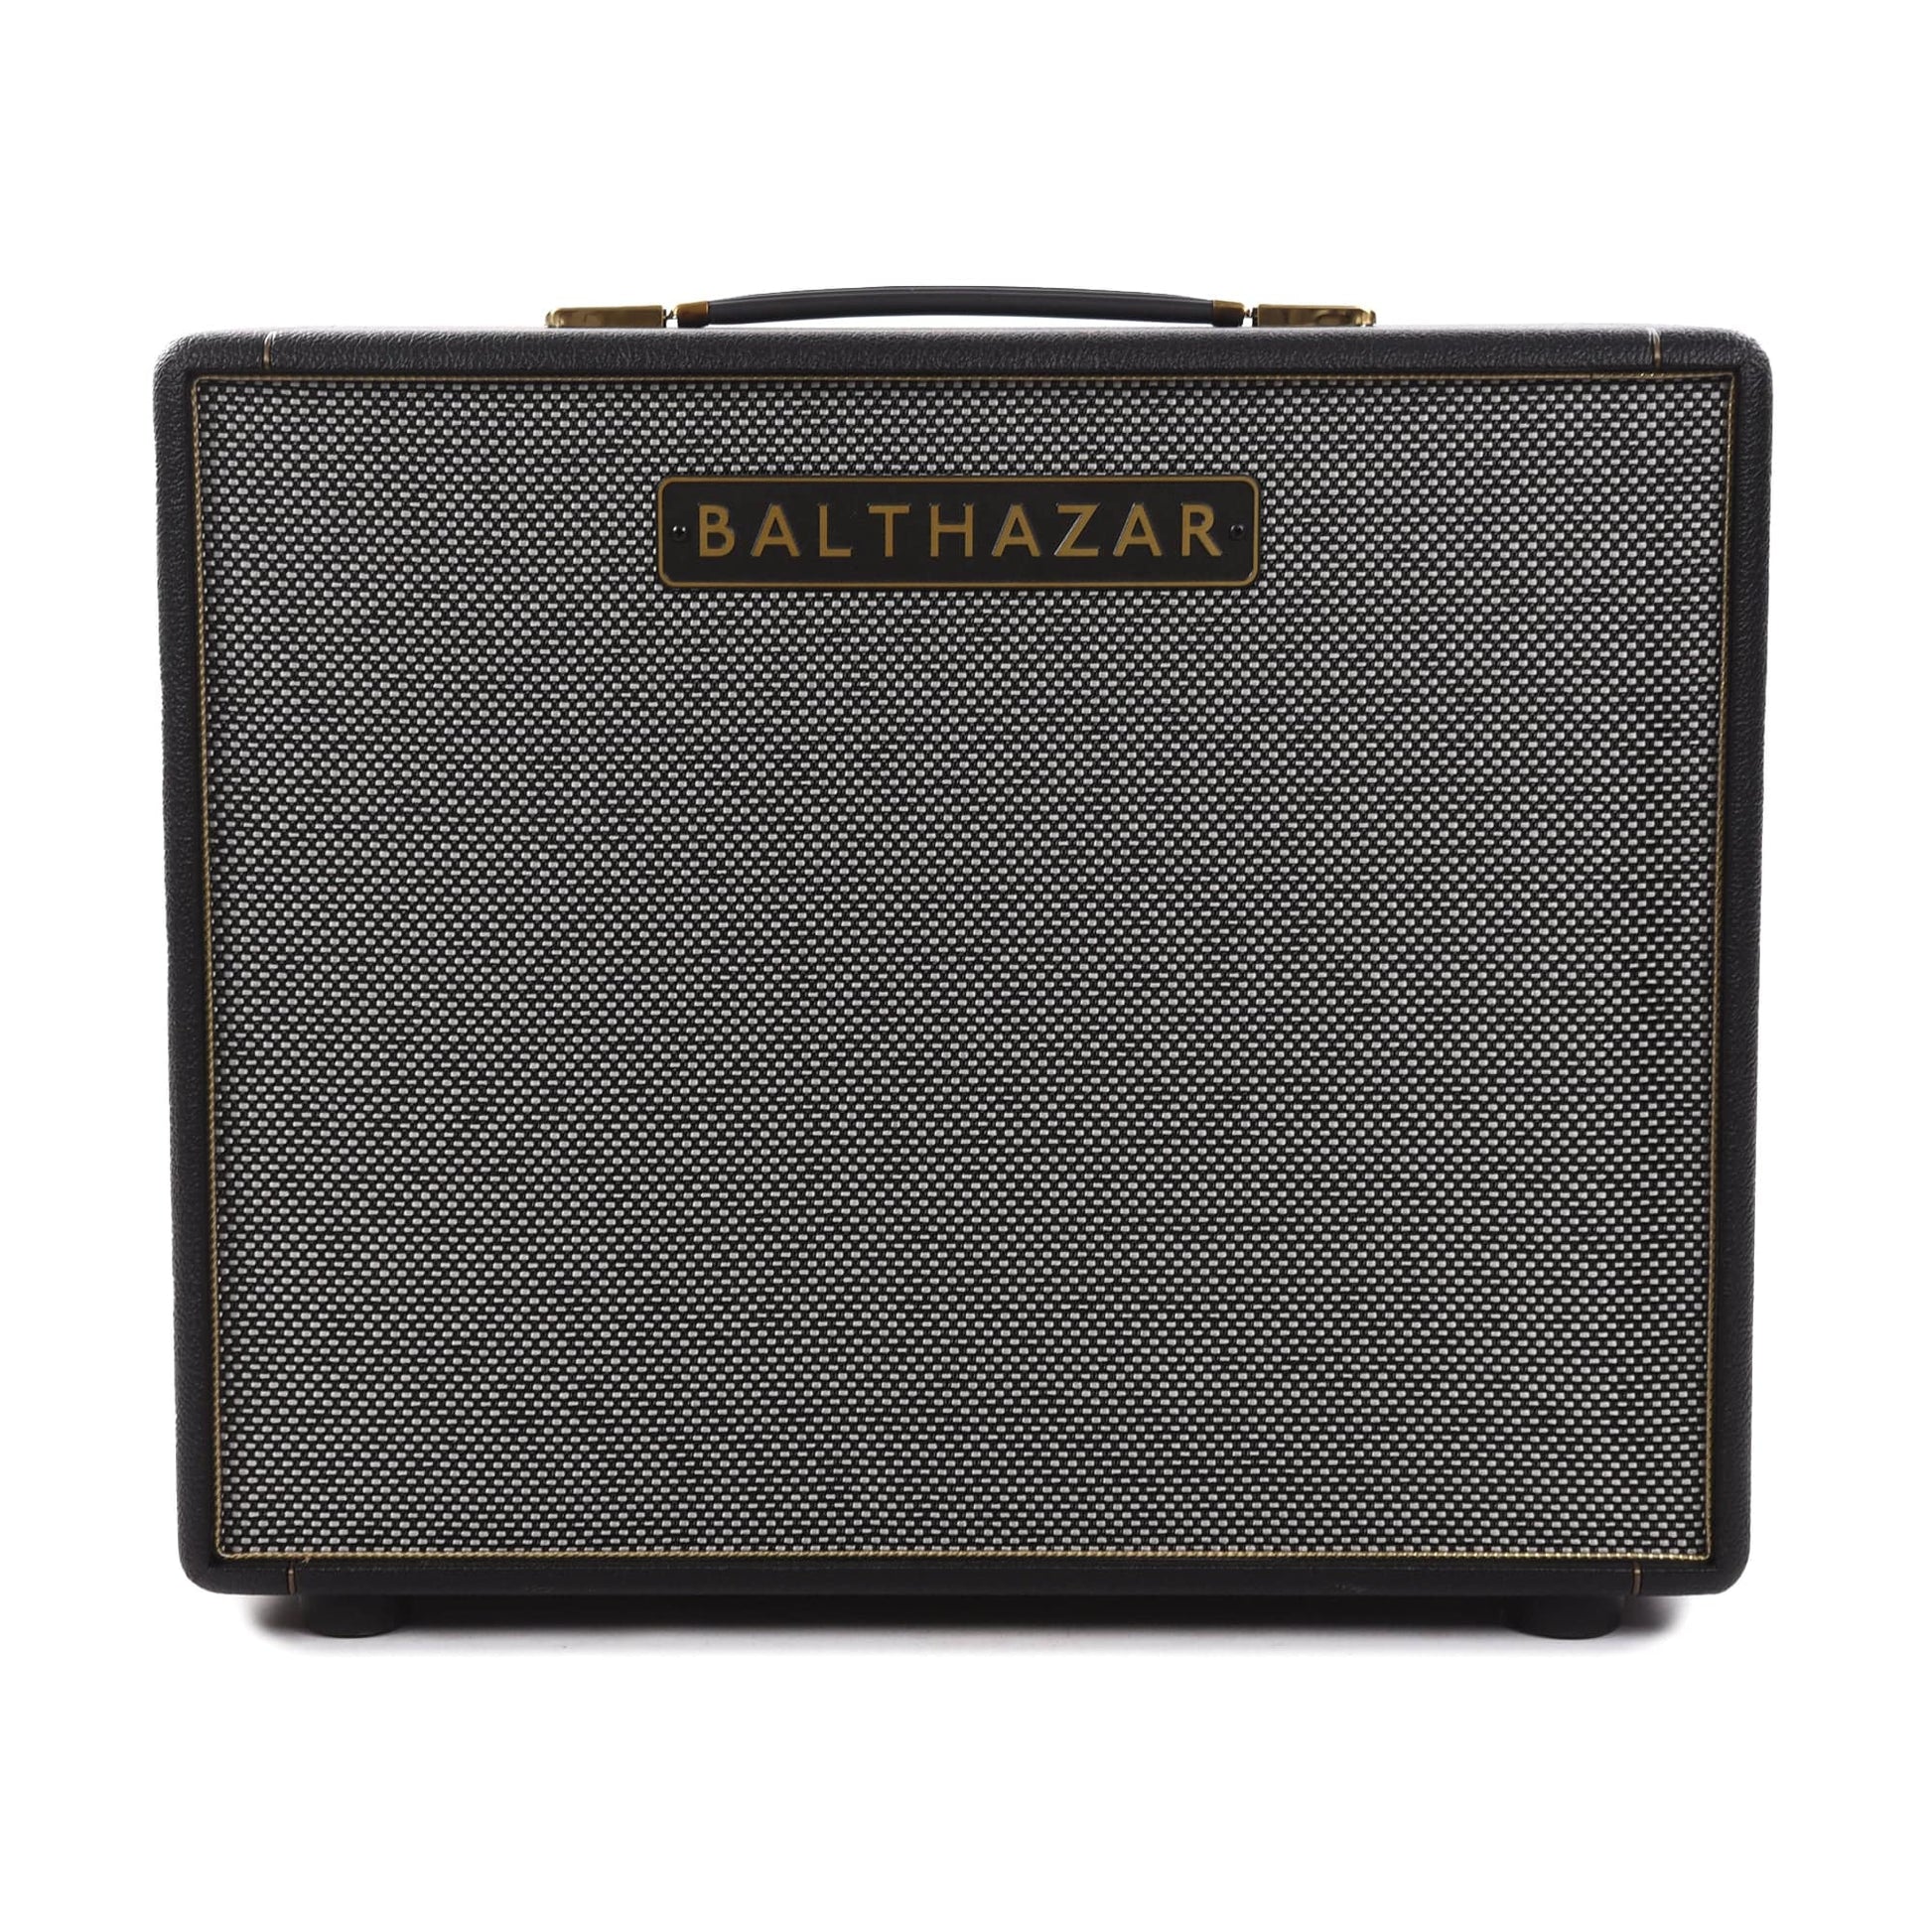 Balthazar Audio Systems Cabaret 1x12 Extension Cabinet Amps / Guitar Cabinets